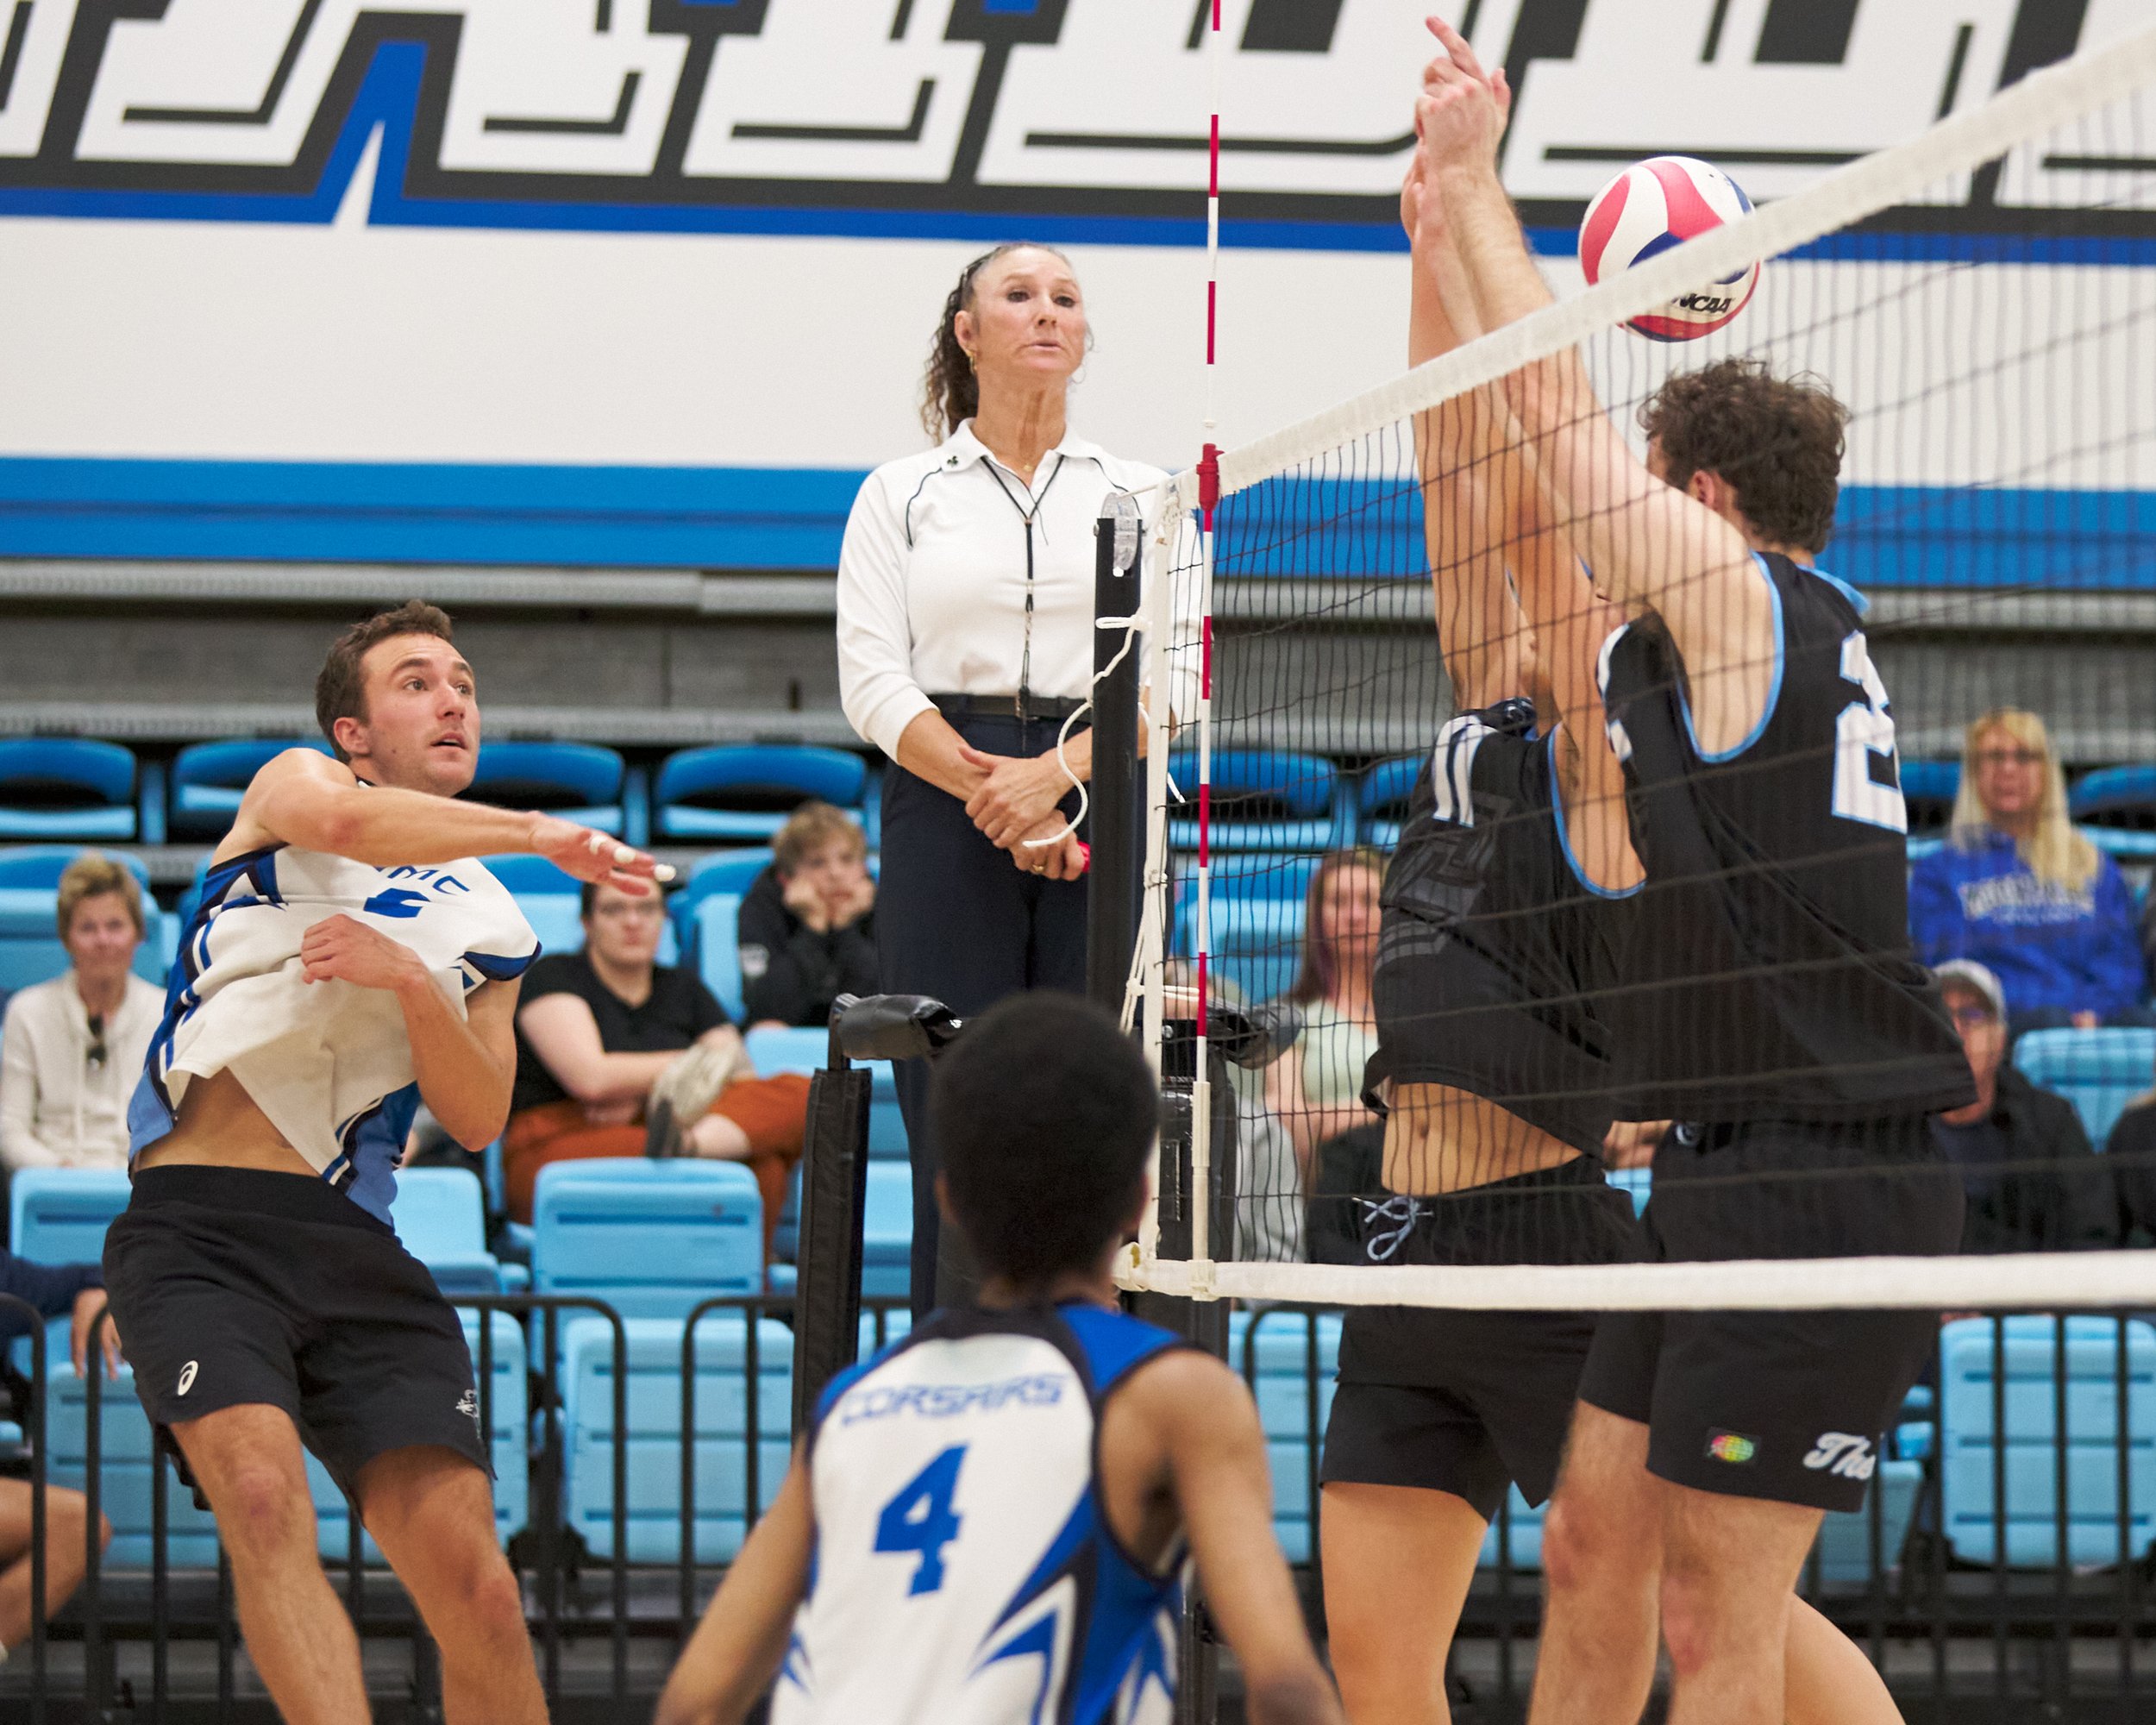  Santa Monica College Corsairs' Kane Schwengel sends the ball past Moorpark College Raiders' Eddy He and Jaxon Rust during the men's volleyball match on Friday, March 17, 2023, at Moorpark College's Gymnasium in Moorpark, Calif. The Corsairs lost 3-1